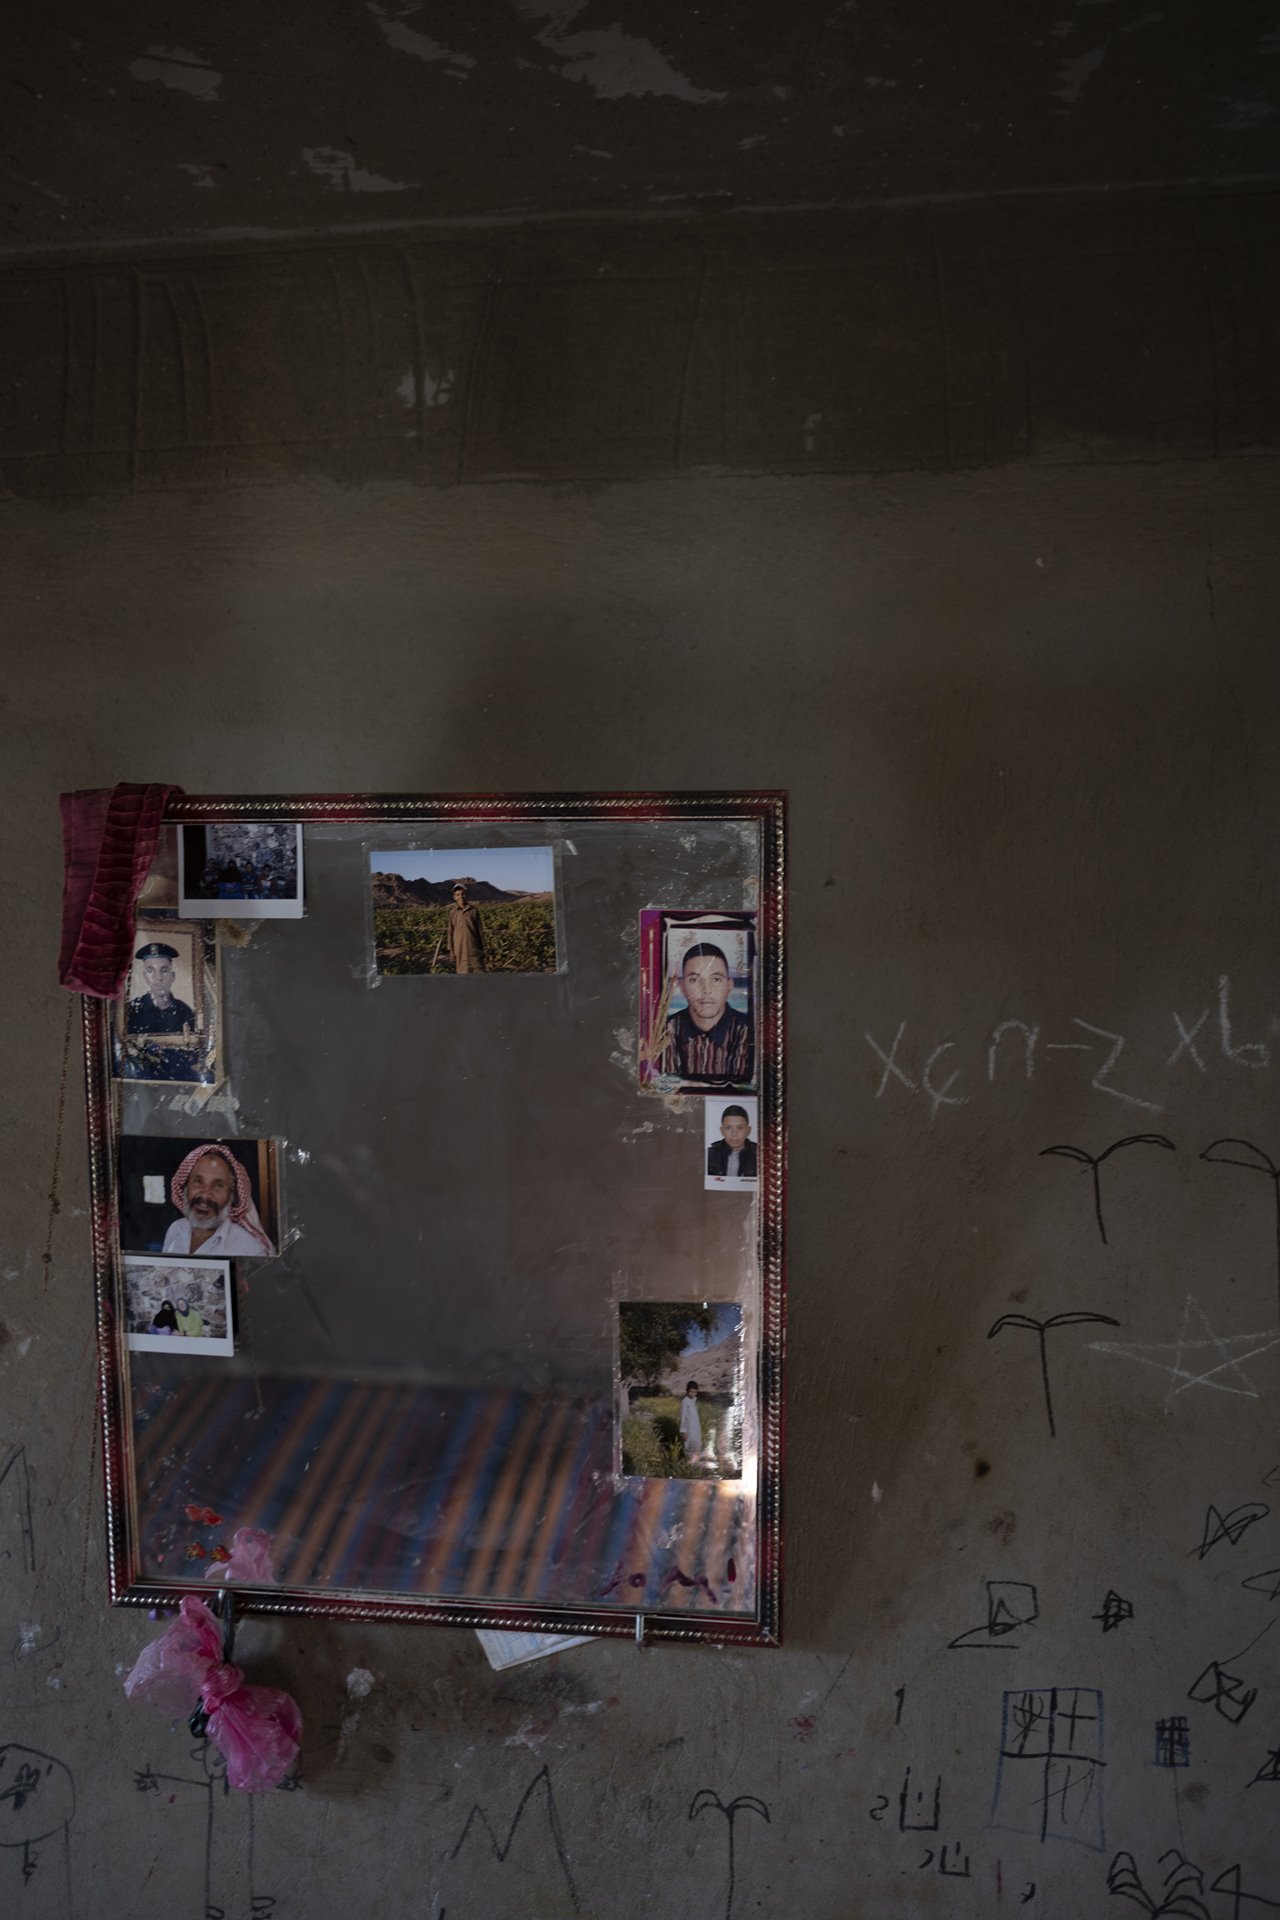 Photographs of male members of the family are hung around a mirror frame at the elder&rsquo;s family home in Al-Tarfa village, St. Catherine, South Sinai, Egypt.